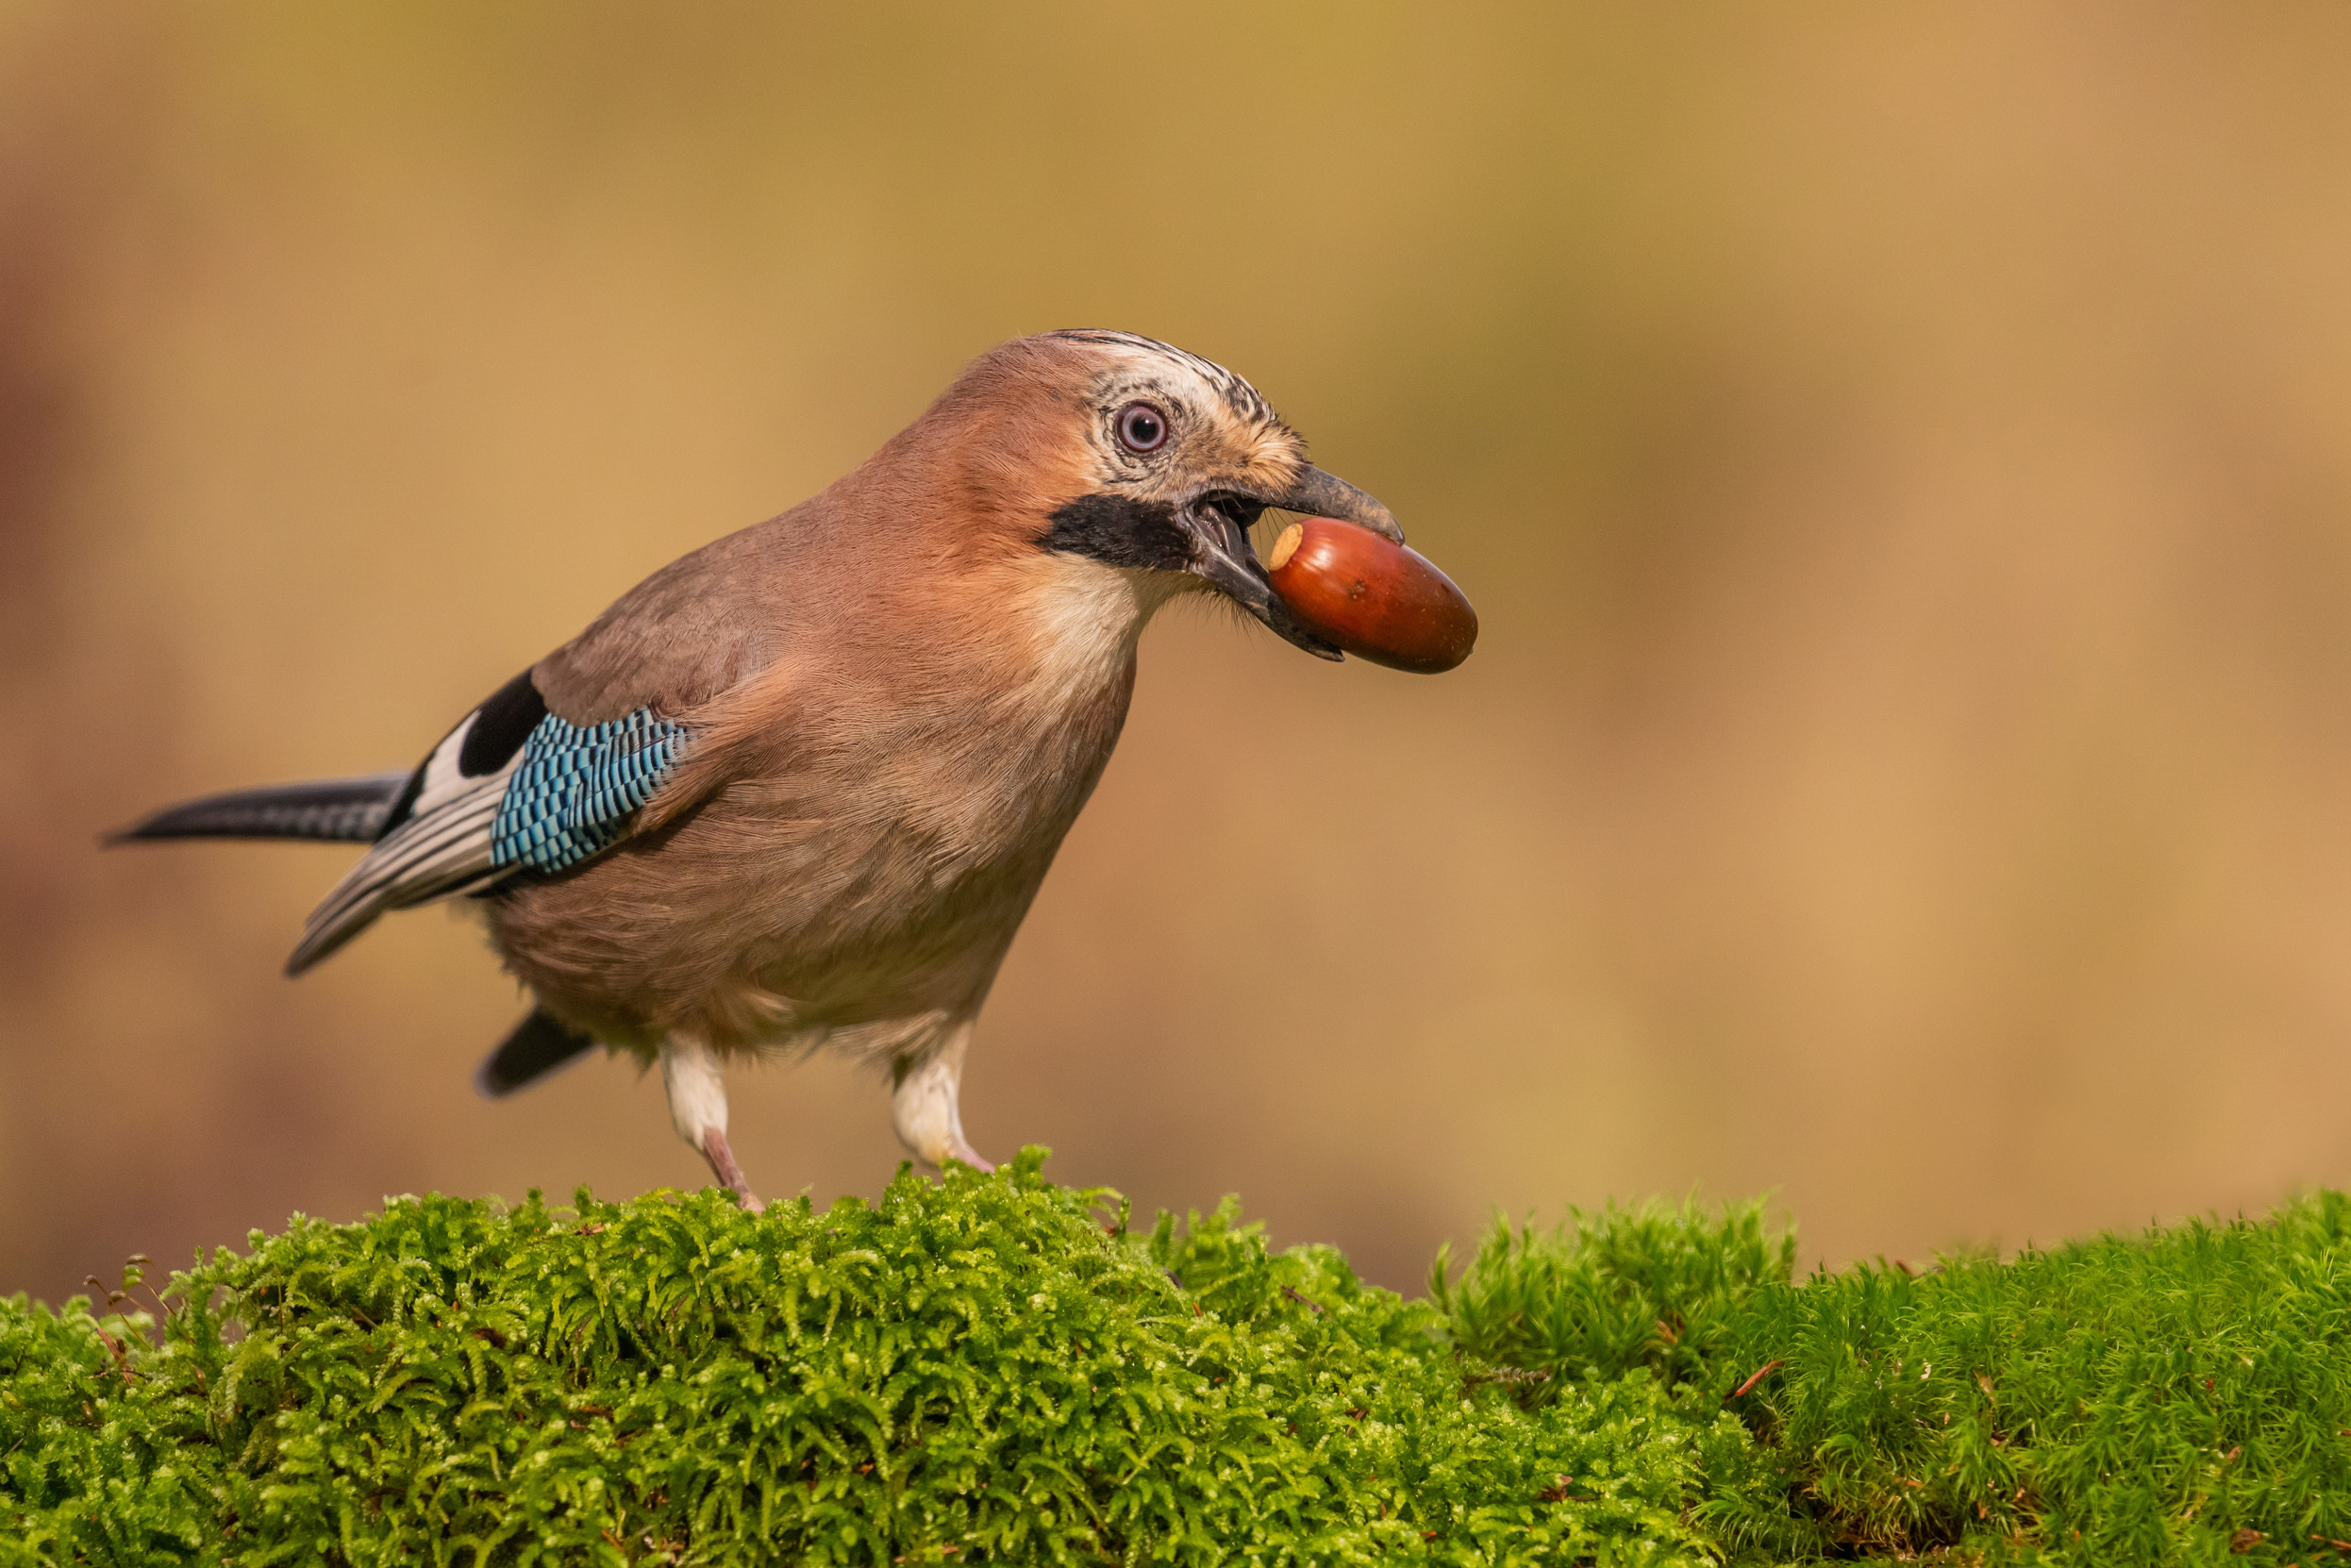 A lone Jay perched on a moss covered log with an acorn in it's mouth.